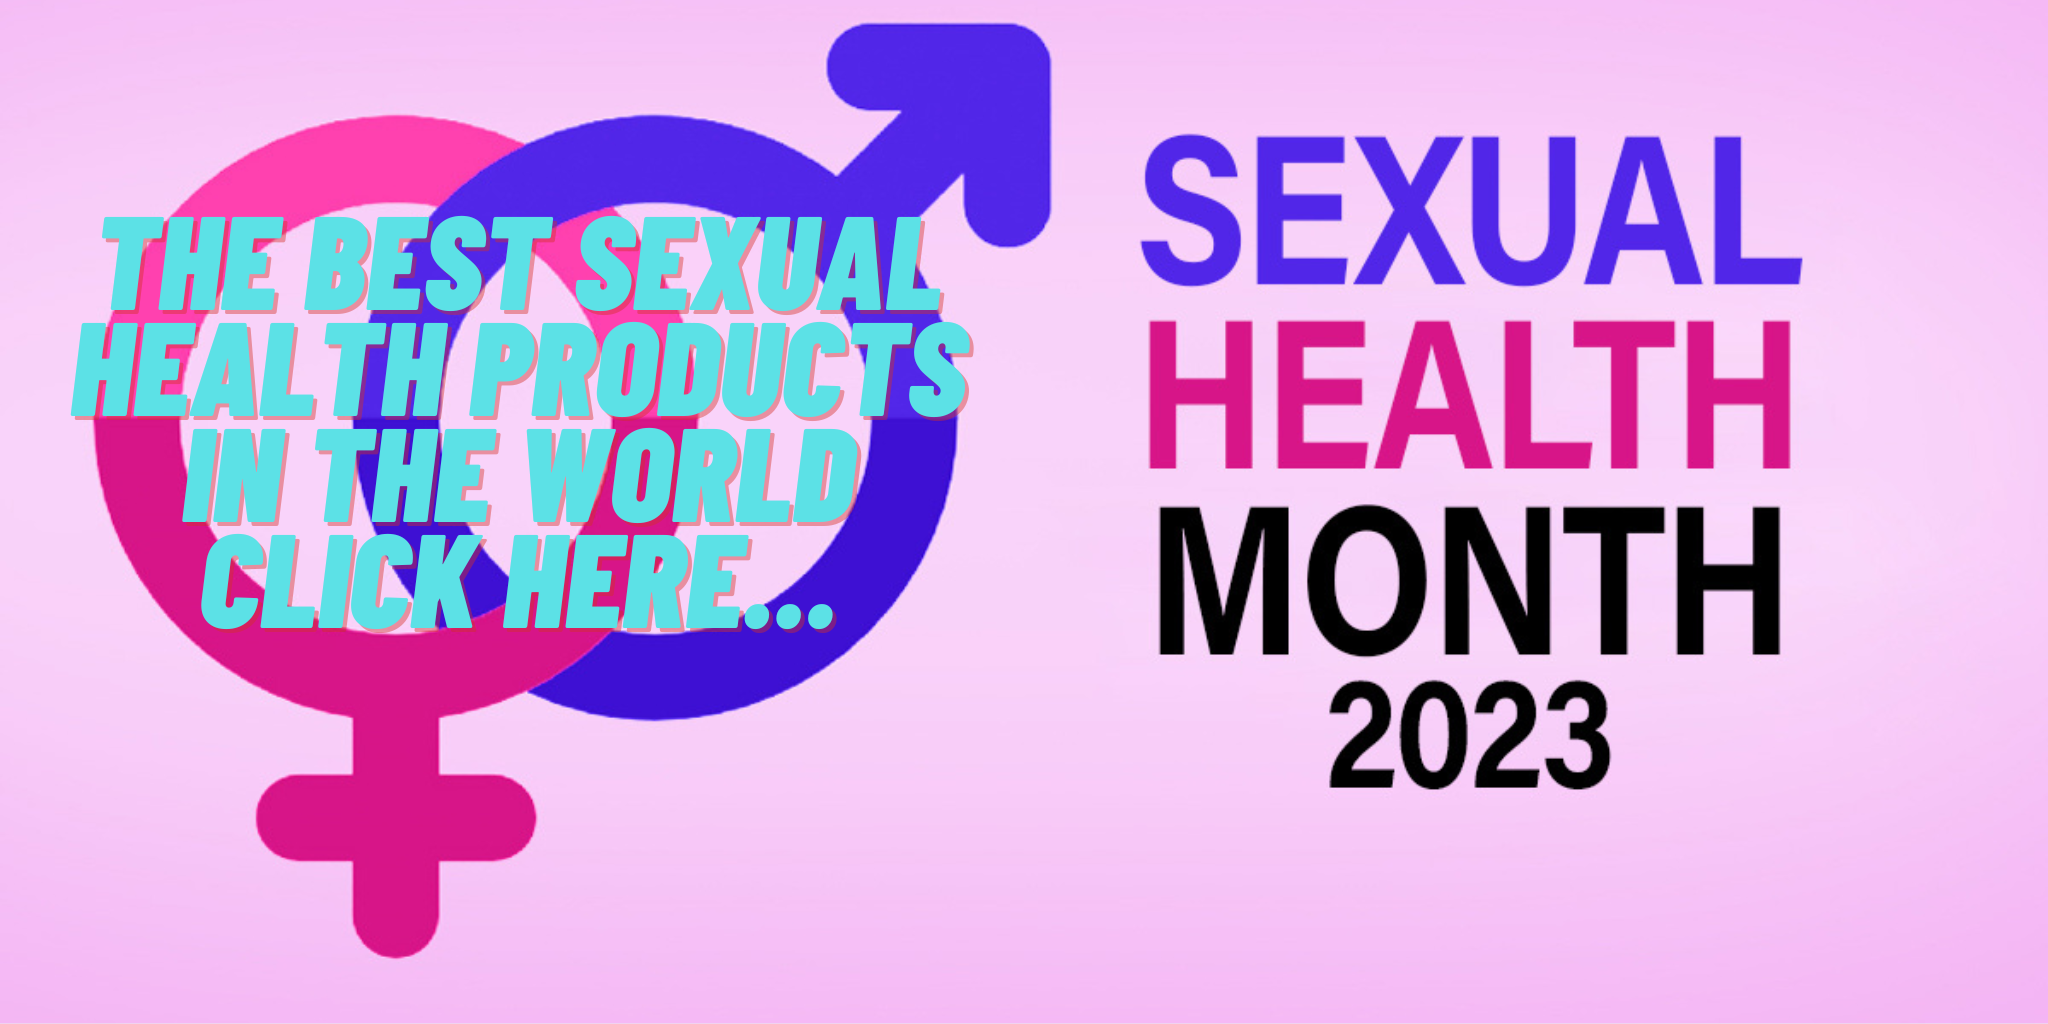 The best sexual health products in the world click here. 4 1